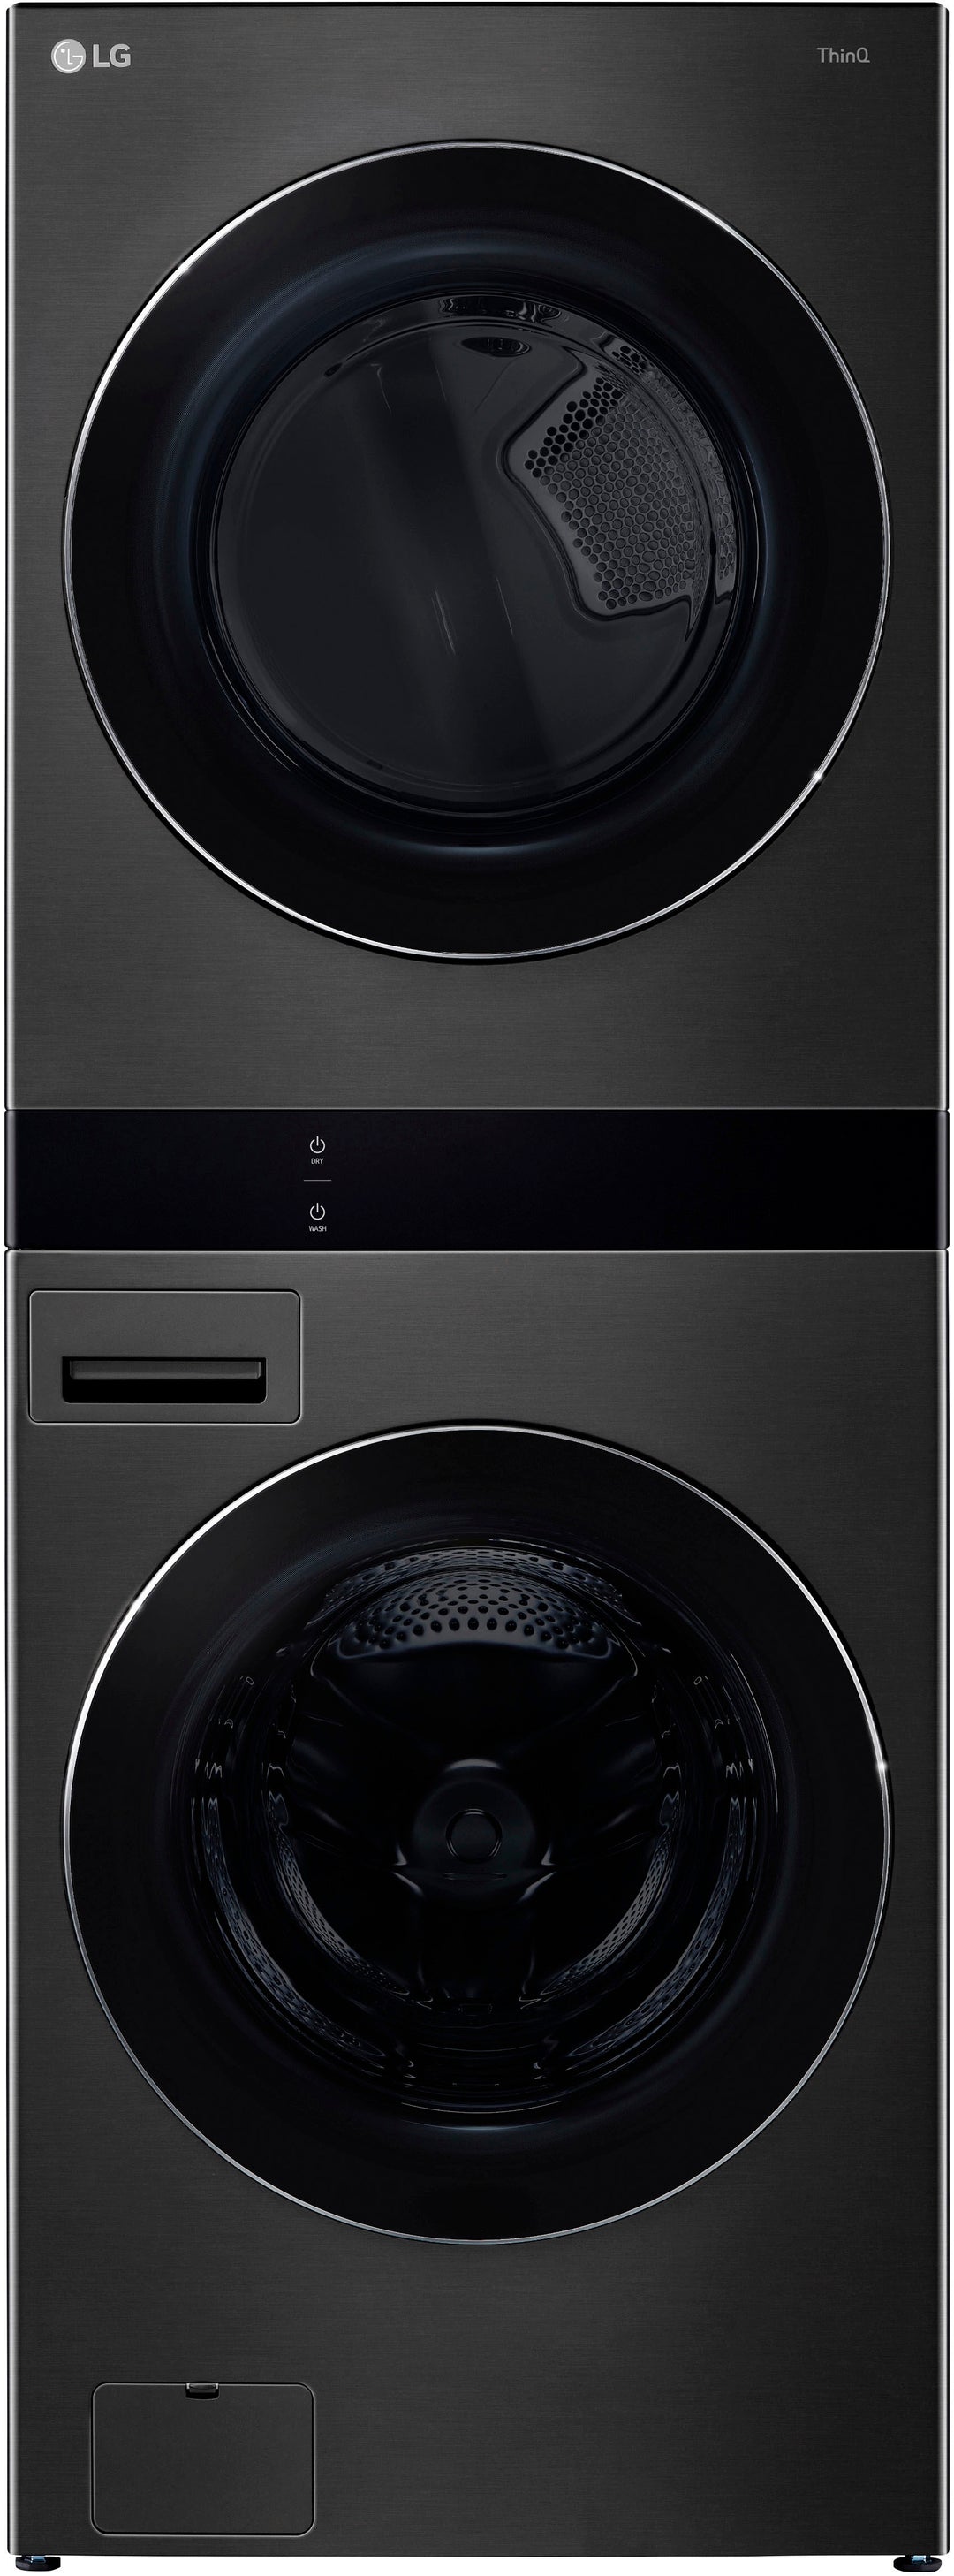 LG - 5.0 Cu. Ft. HE Smart Front Load Washer and 7.4 Cu. Ft. Electric Dryer WashTower with Steam and Center Control - Black Steel_3